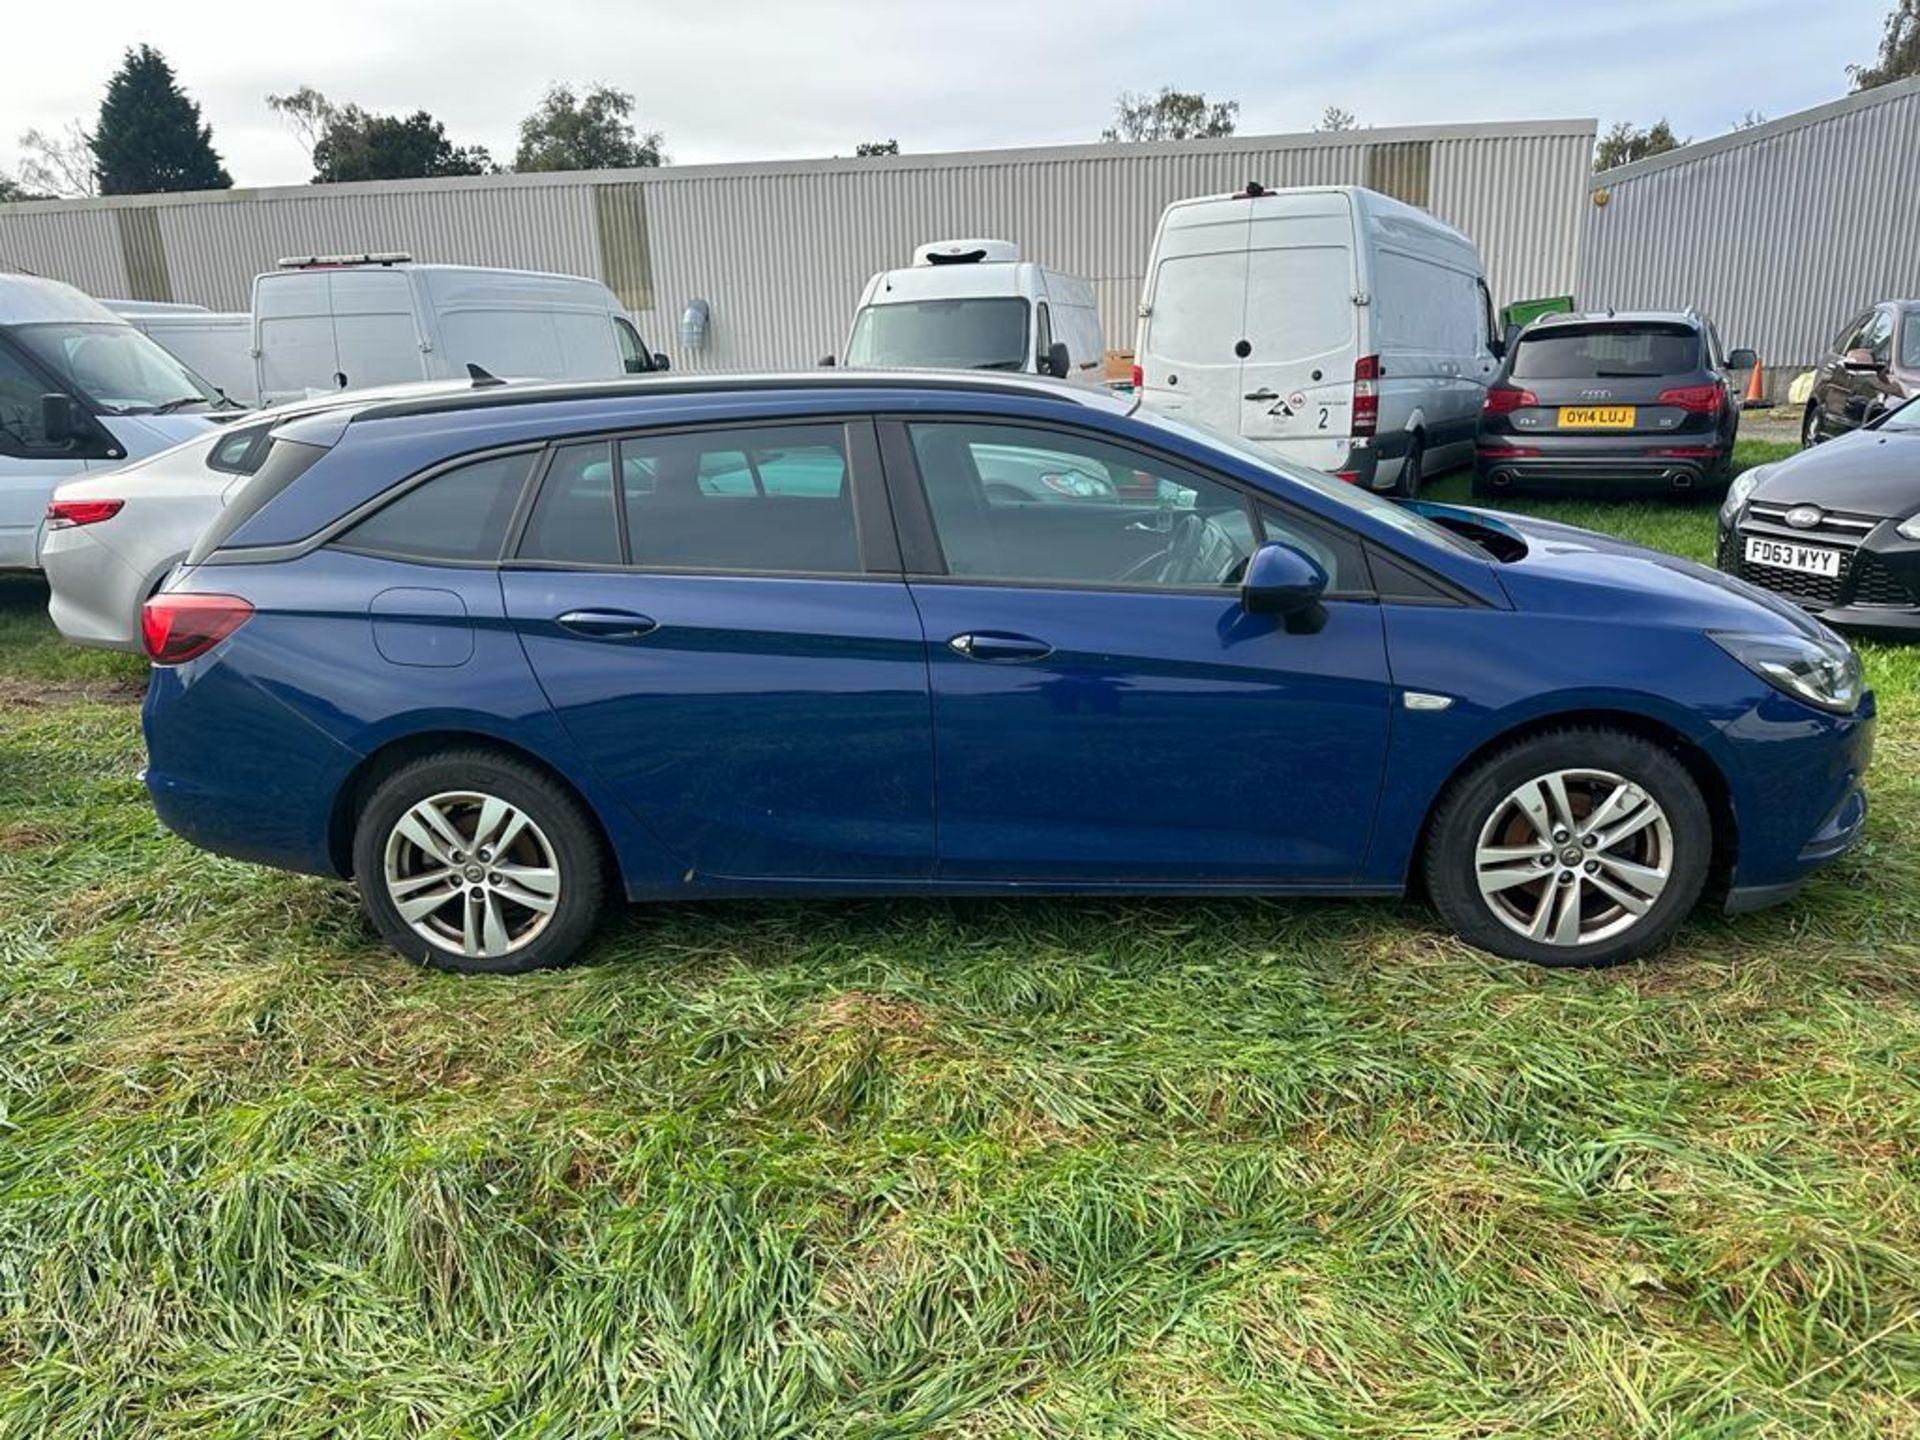 2018 18 VAUXHALL ASTRA ESTATE 1.6 CDTI ESTATE - 86K MILES WITH HISTORY - NON RUNNER - Image 2 of 10